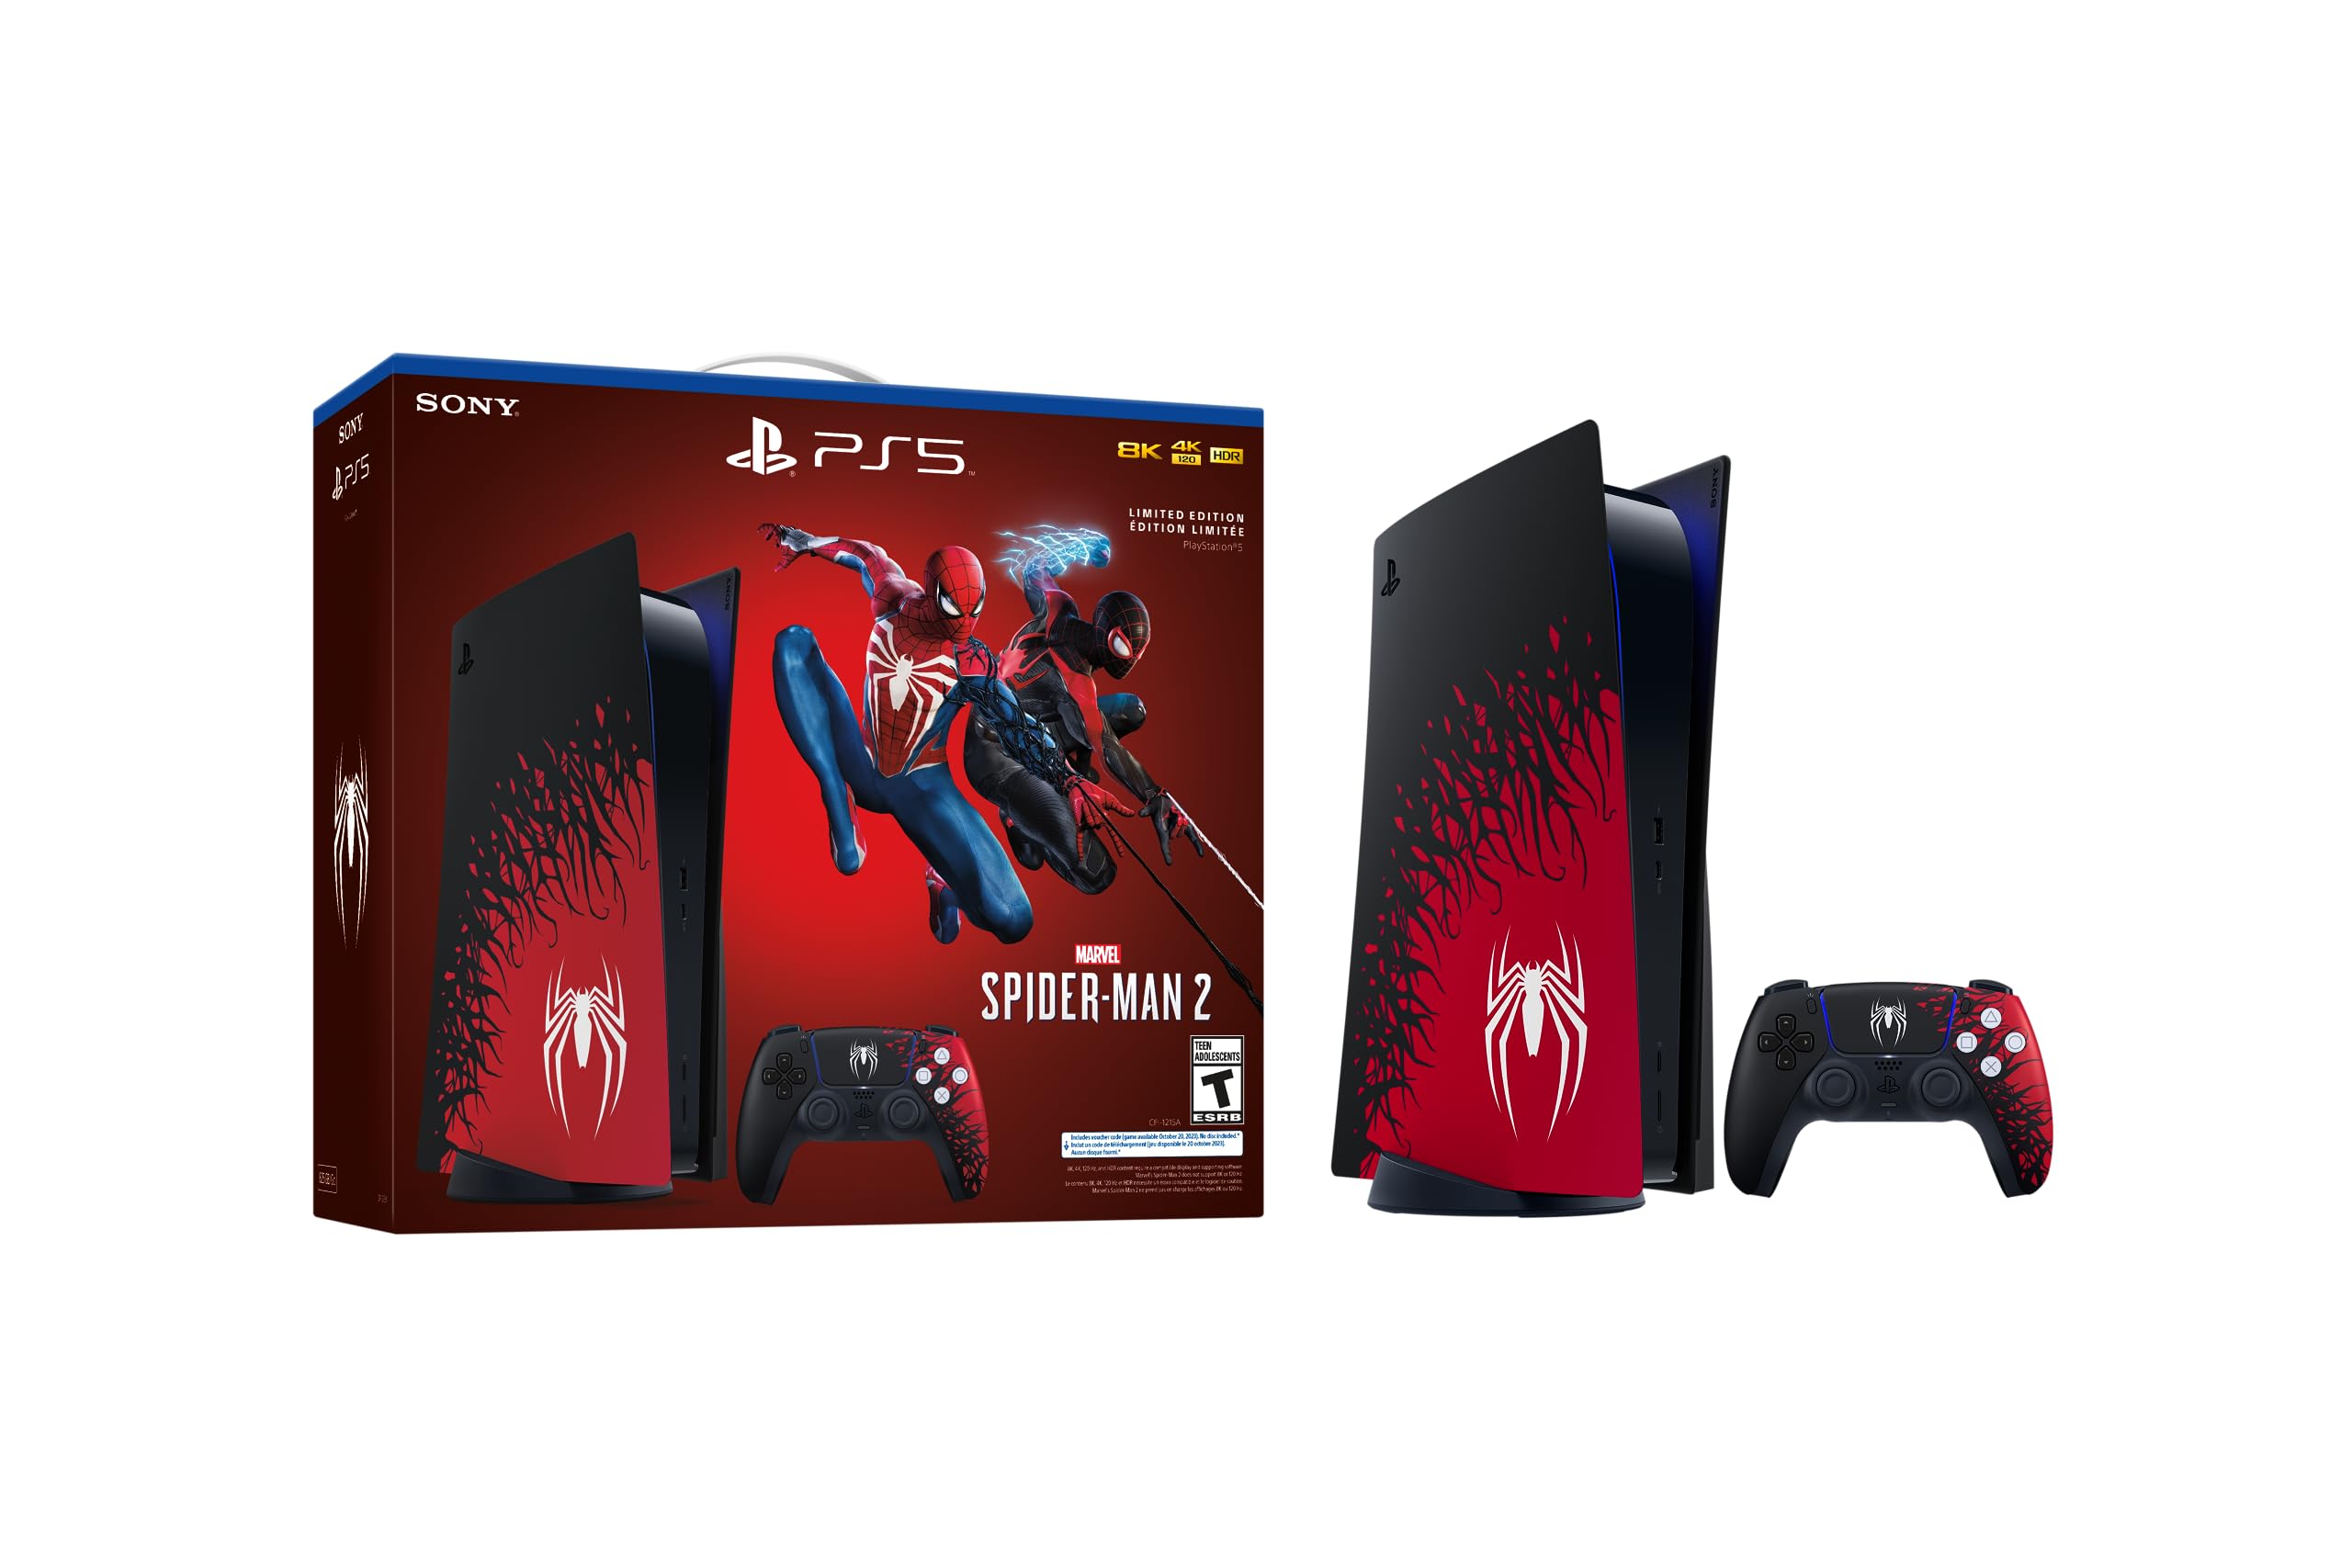 Sony drops PS5 digital edition with free copy of Spider-Man 2